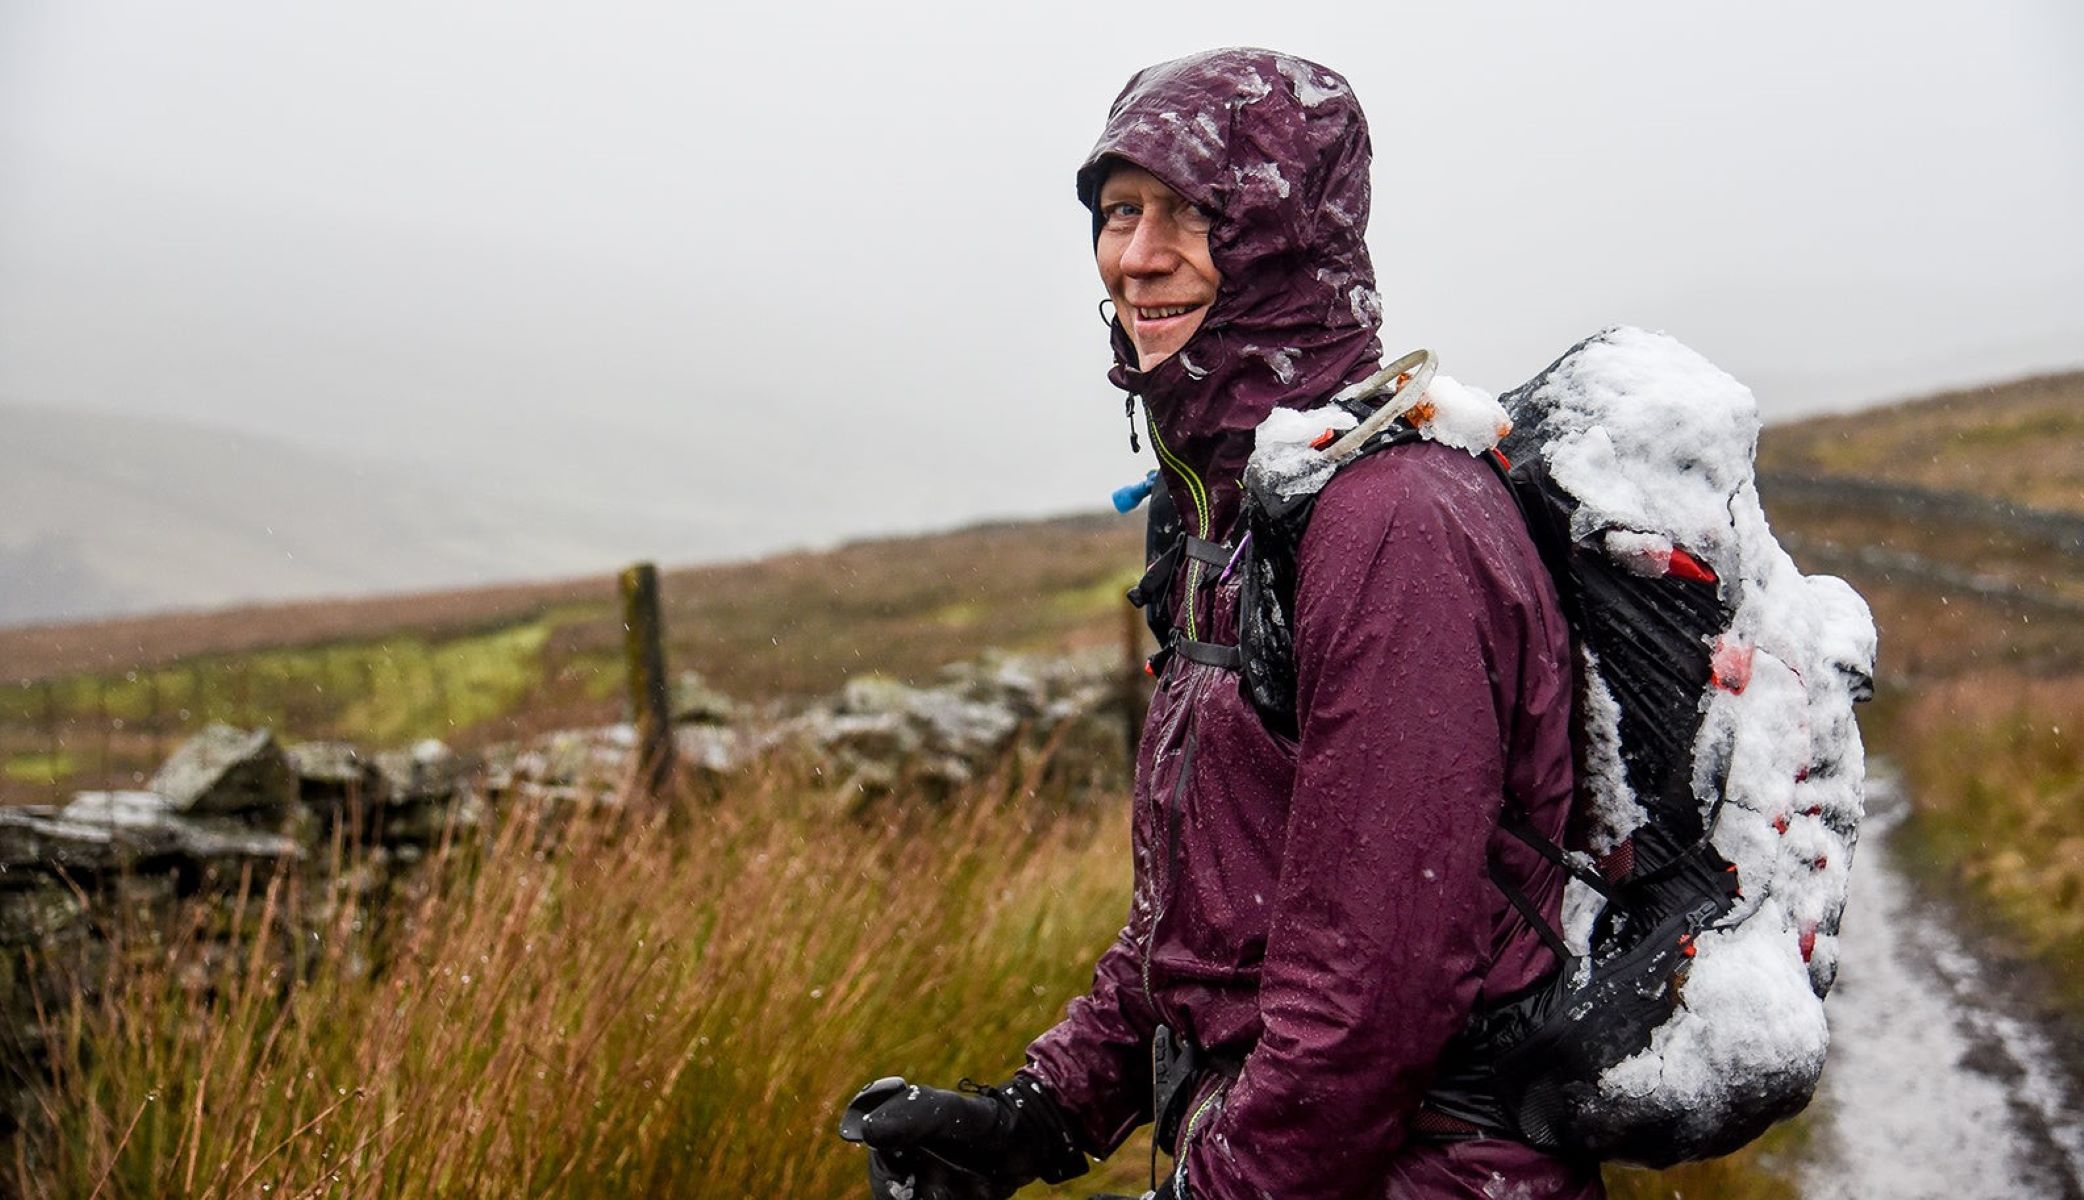 Experiencing The Grueling Reality Of “Britain’s Most Brutal” Race